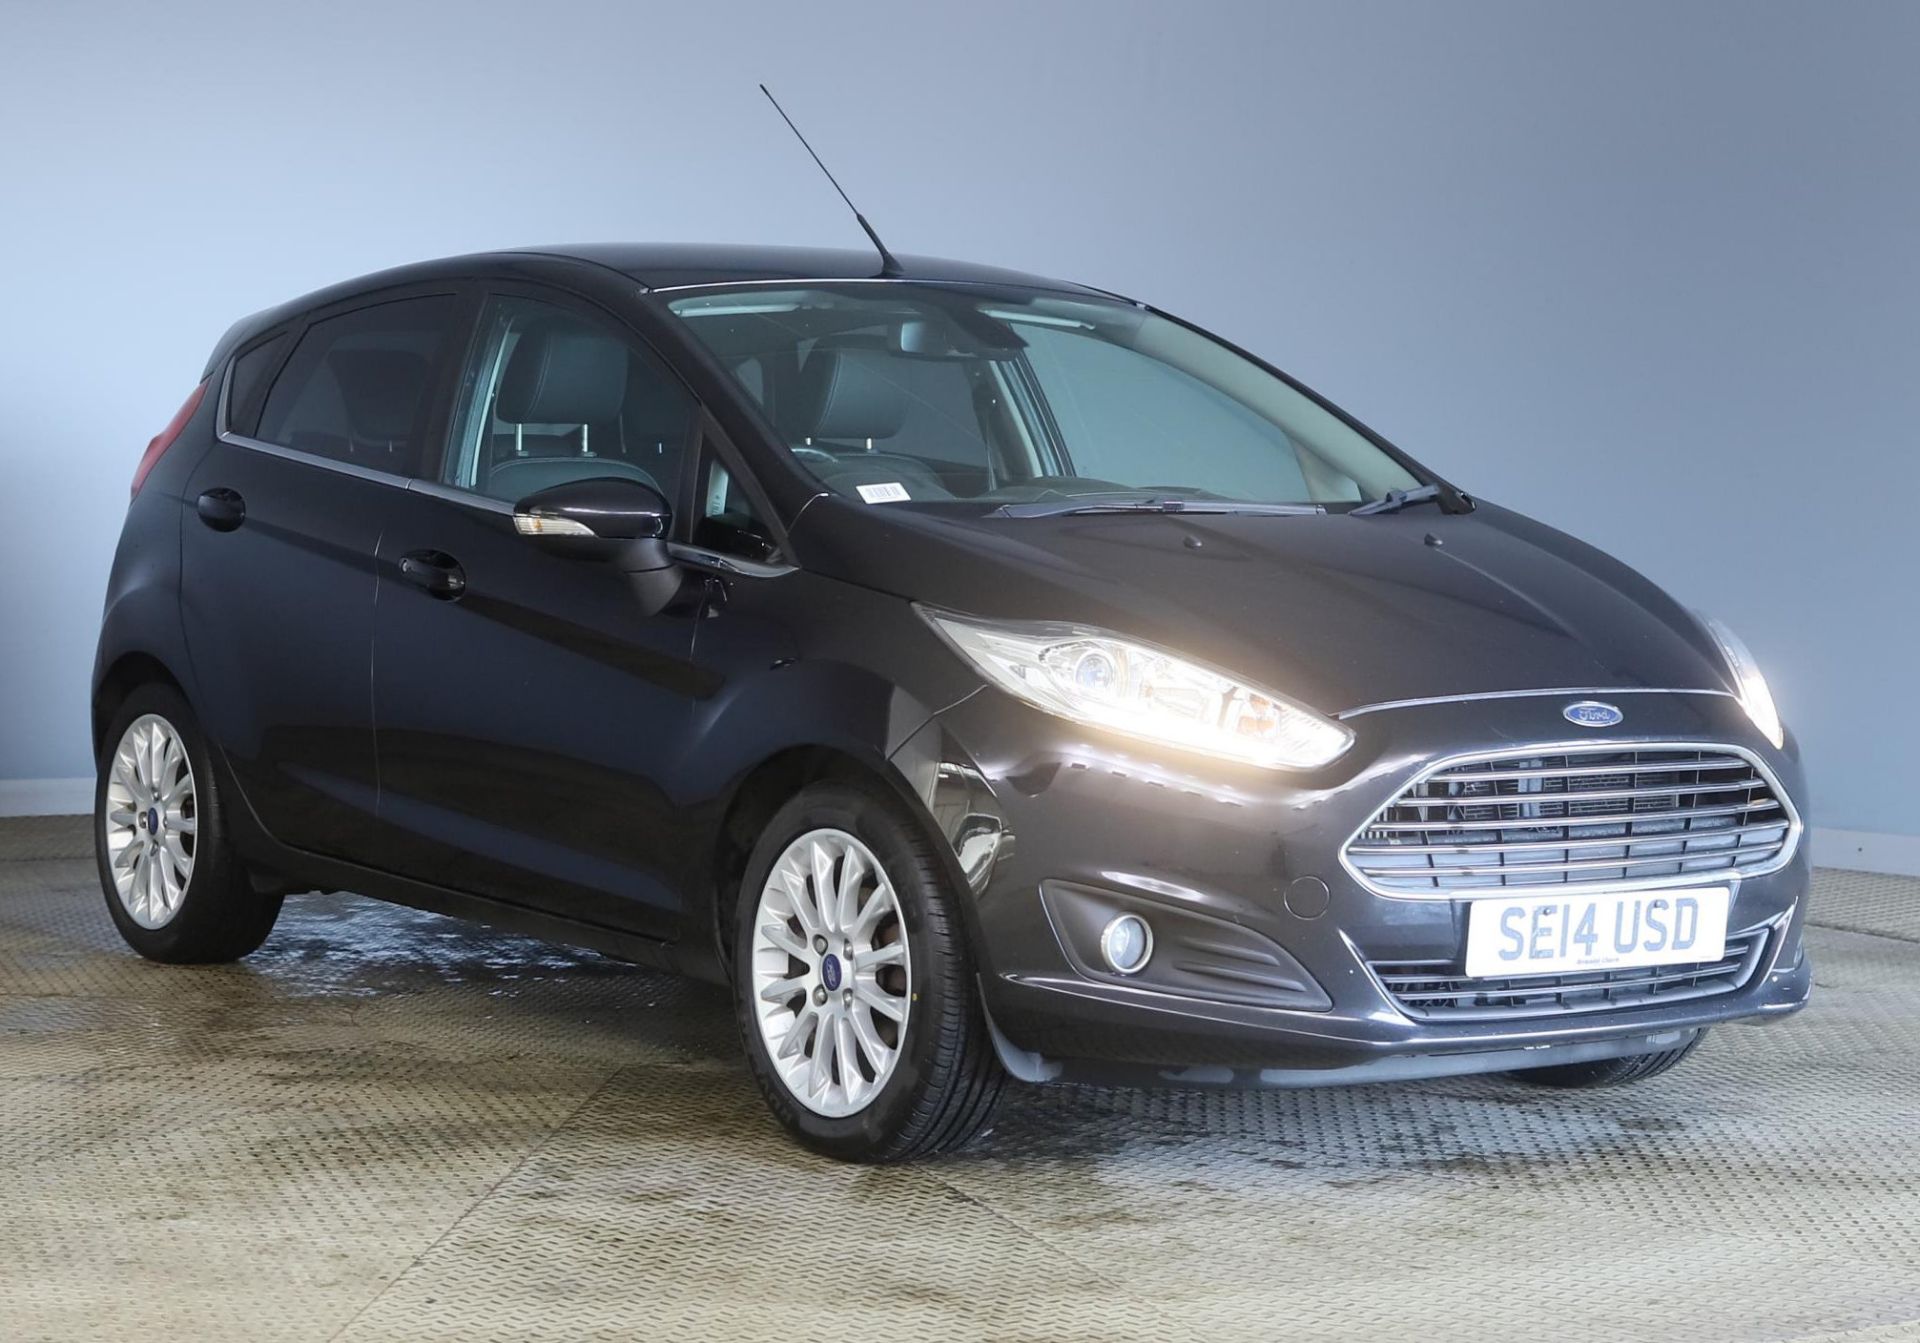 2014 Ford Fiesta 1.0 Titanium X 5 Door Hatchback - CL505 - NO VAT ON THE HAMMER- Location: Corby, - Image 5 of 12